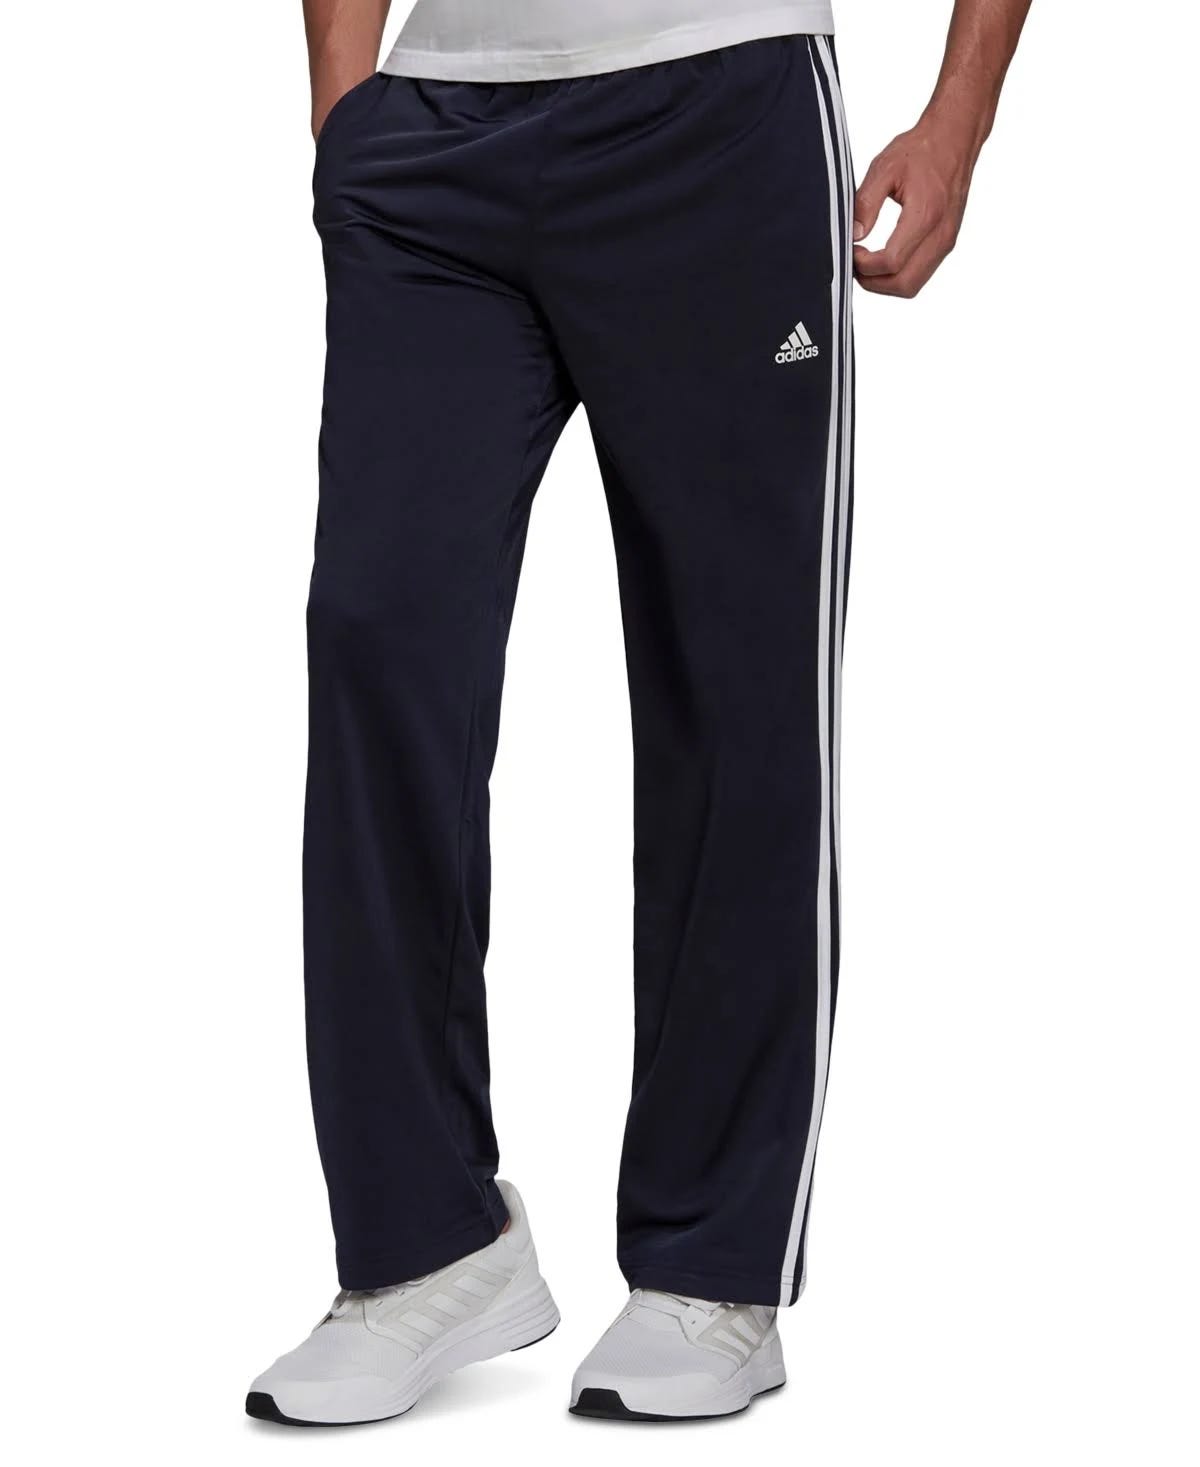 Adidas Men's Recycled Polyester Track Pants - Primegreen 3-Stripes Style | Image